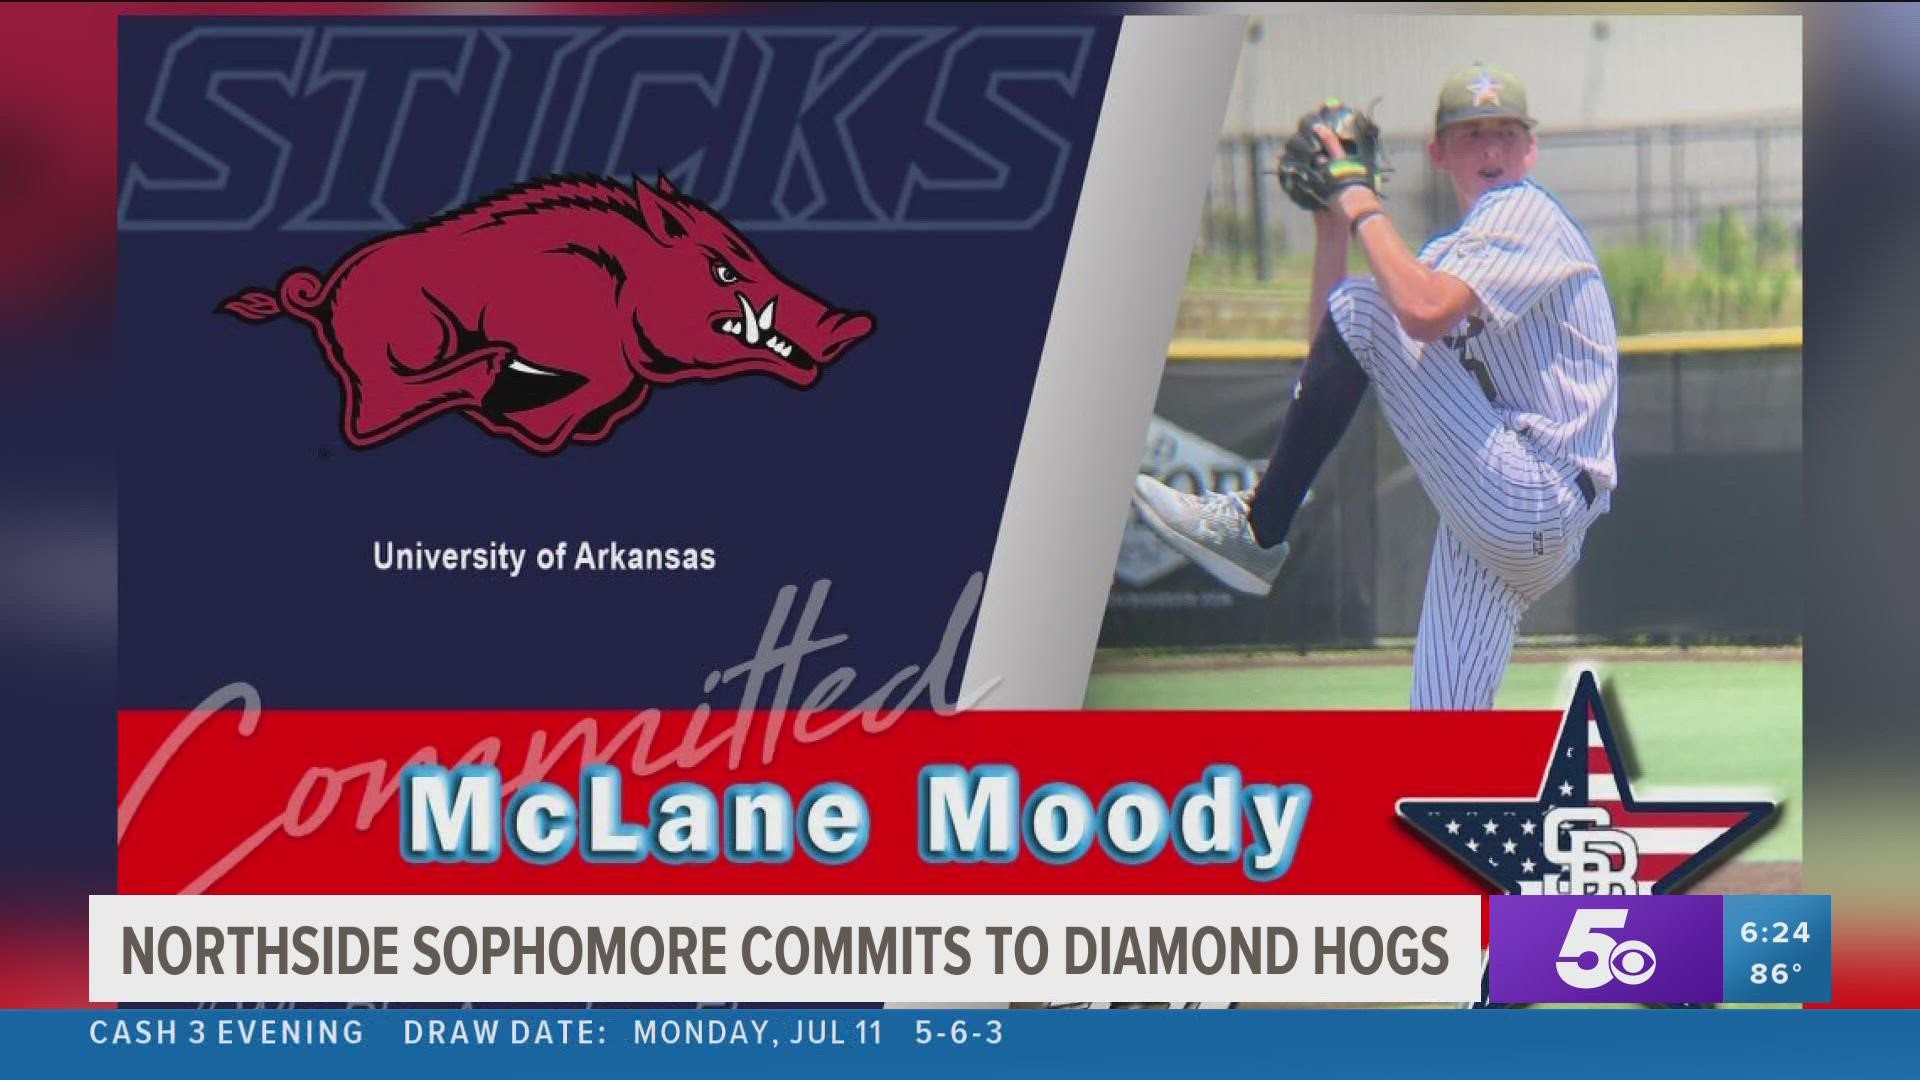 Northside sophomore pitcher commits to Diamond Hogs